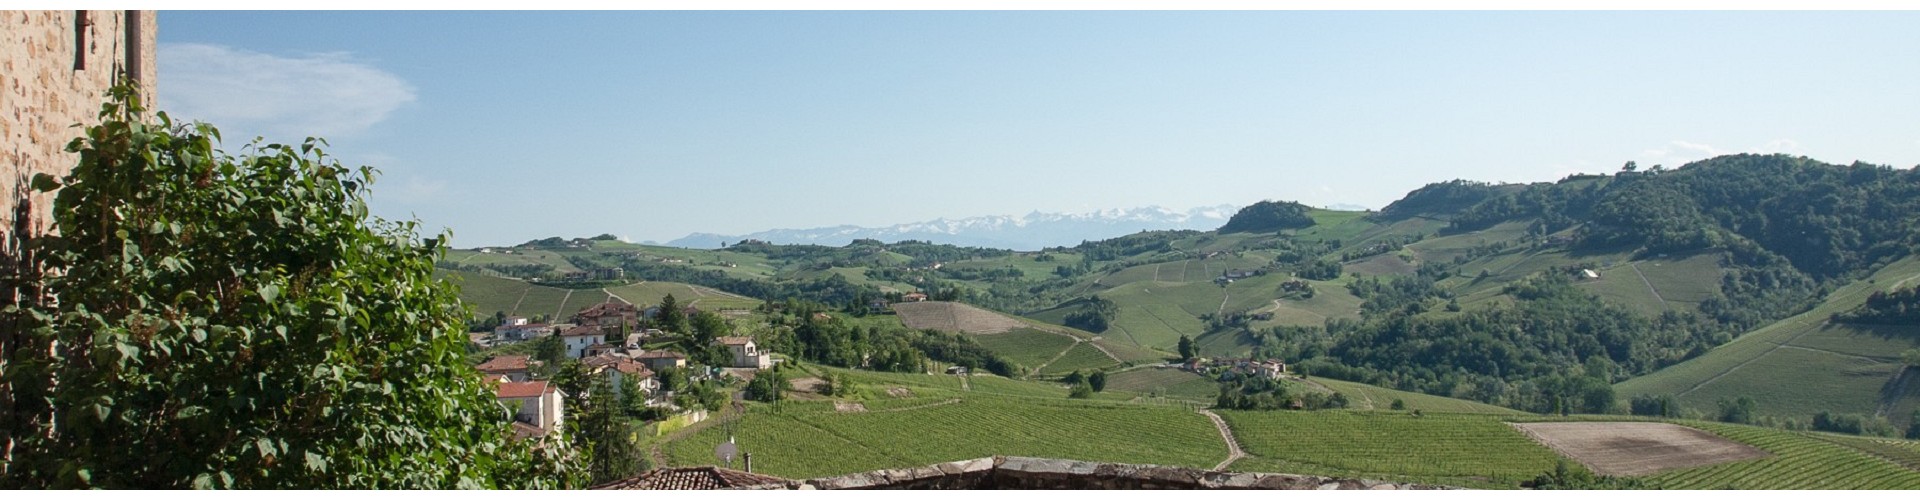 Barolo Wine Tours | Piedmont Wine Tours from Milan | Piedmont Food and Wine Tours